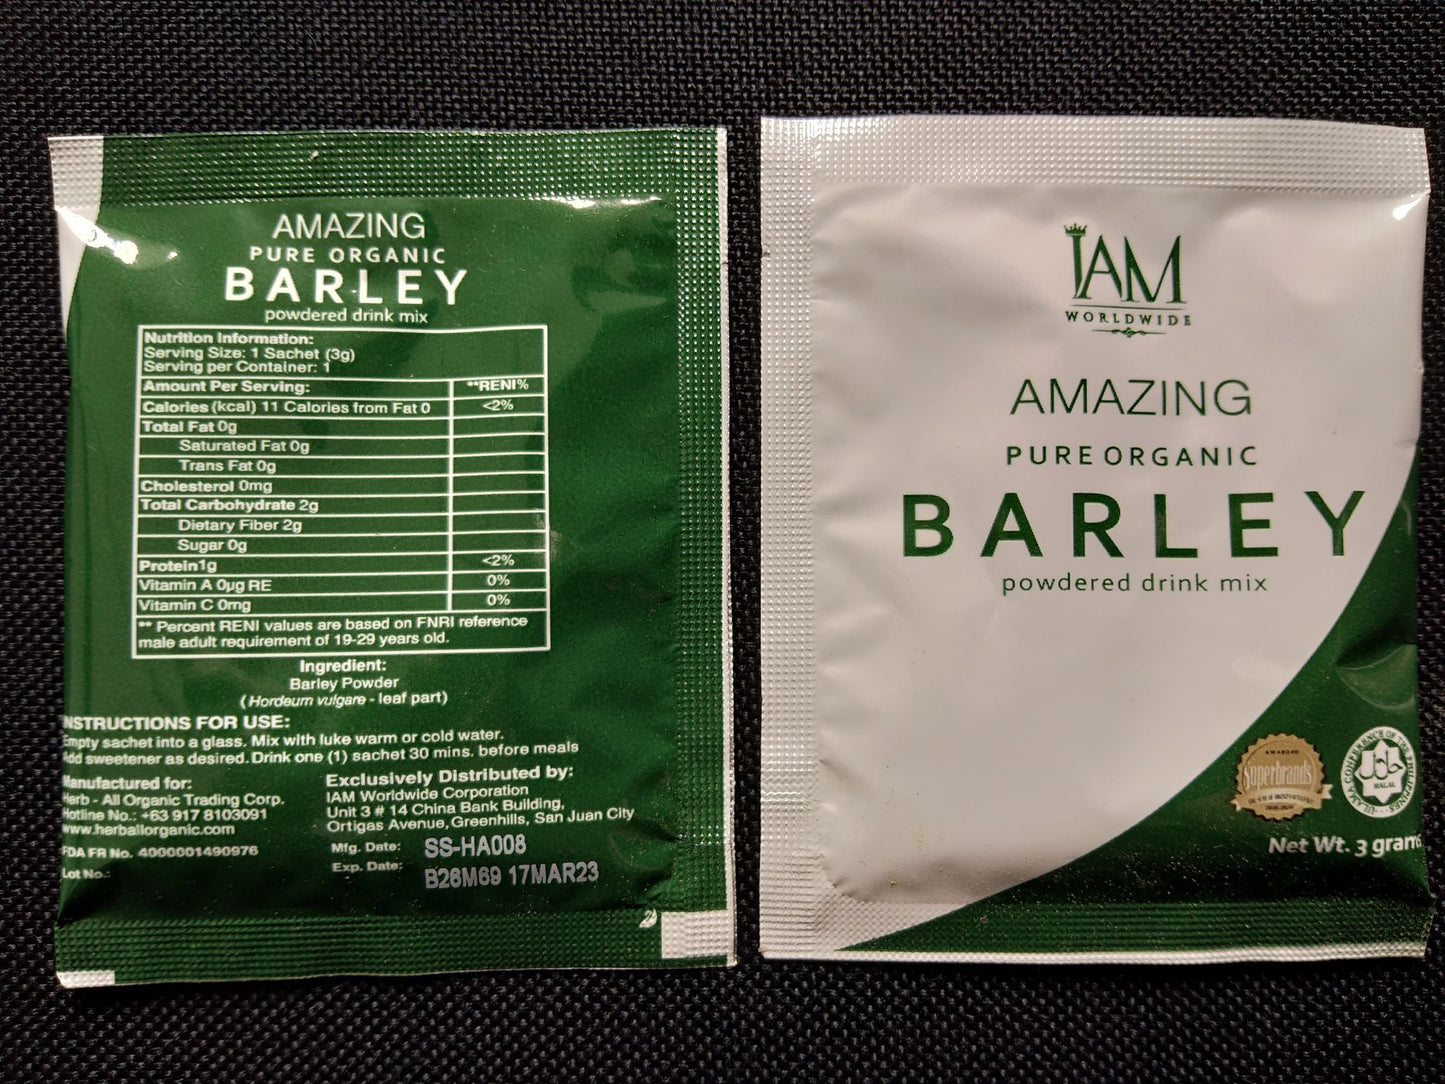 IAM Amazing Barley 4 Boxes | Free Shipping | Cash on Delivery